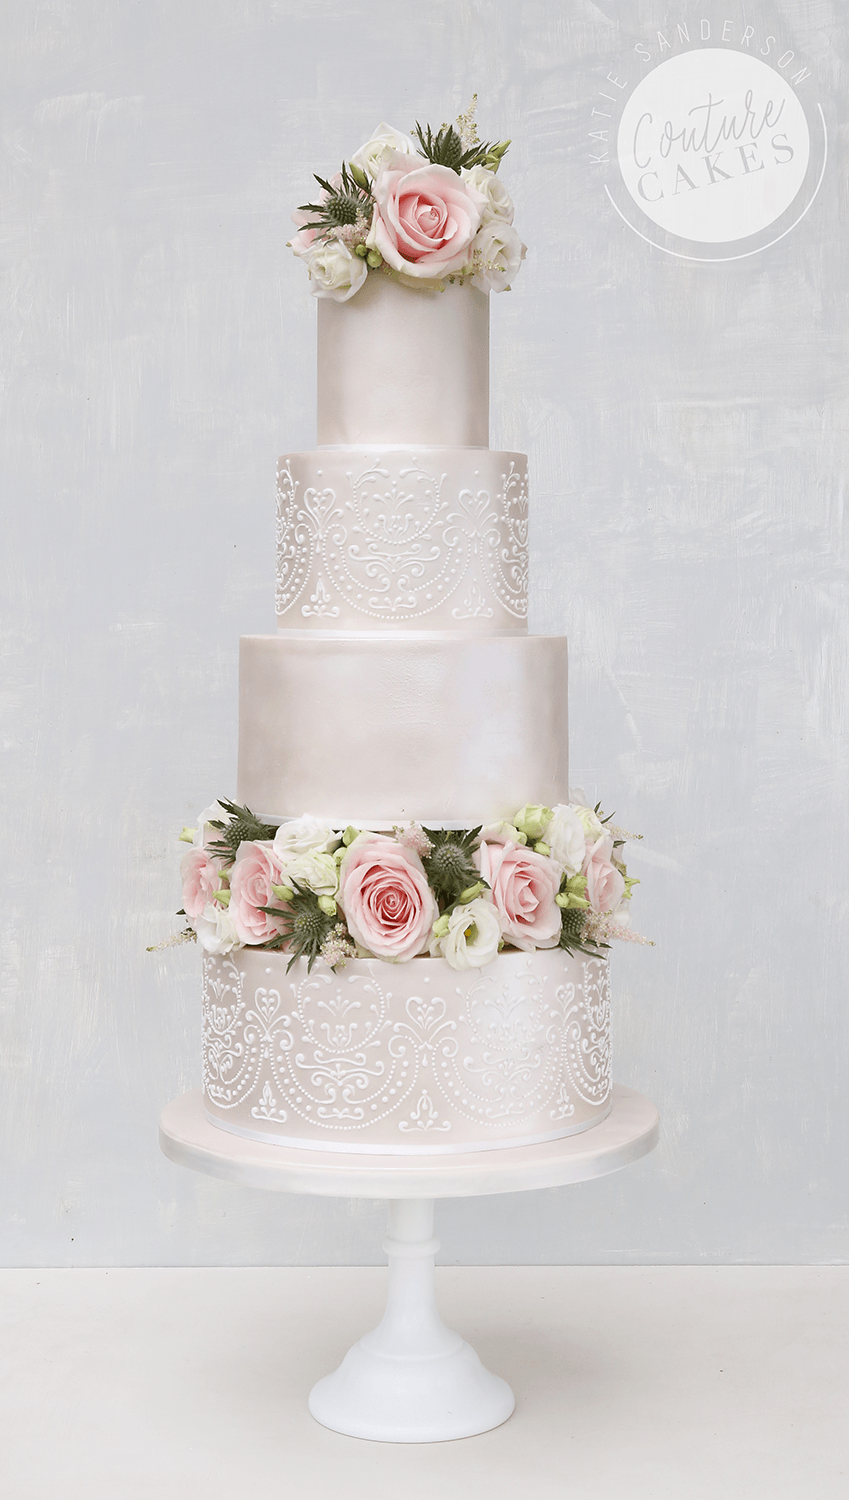 Ornate Piped Wedding Cake: Serves 135 portions, Price category B&C, £760 plus £65 flowers